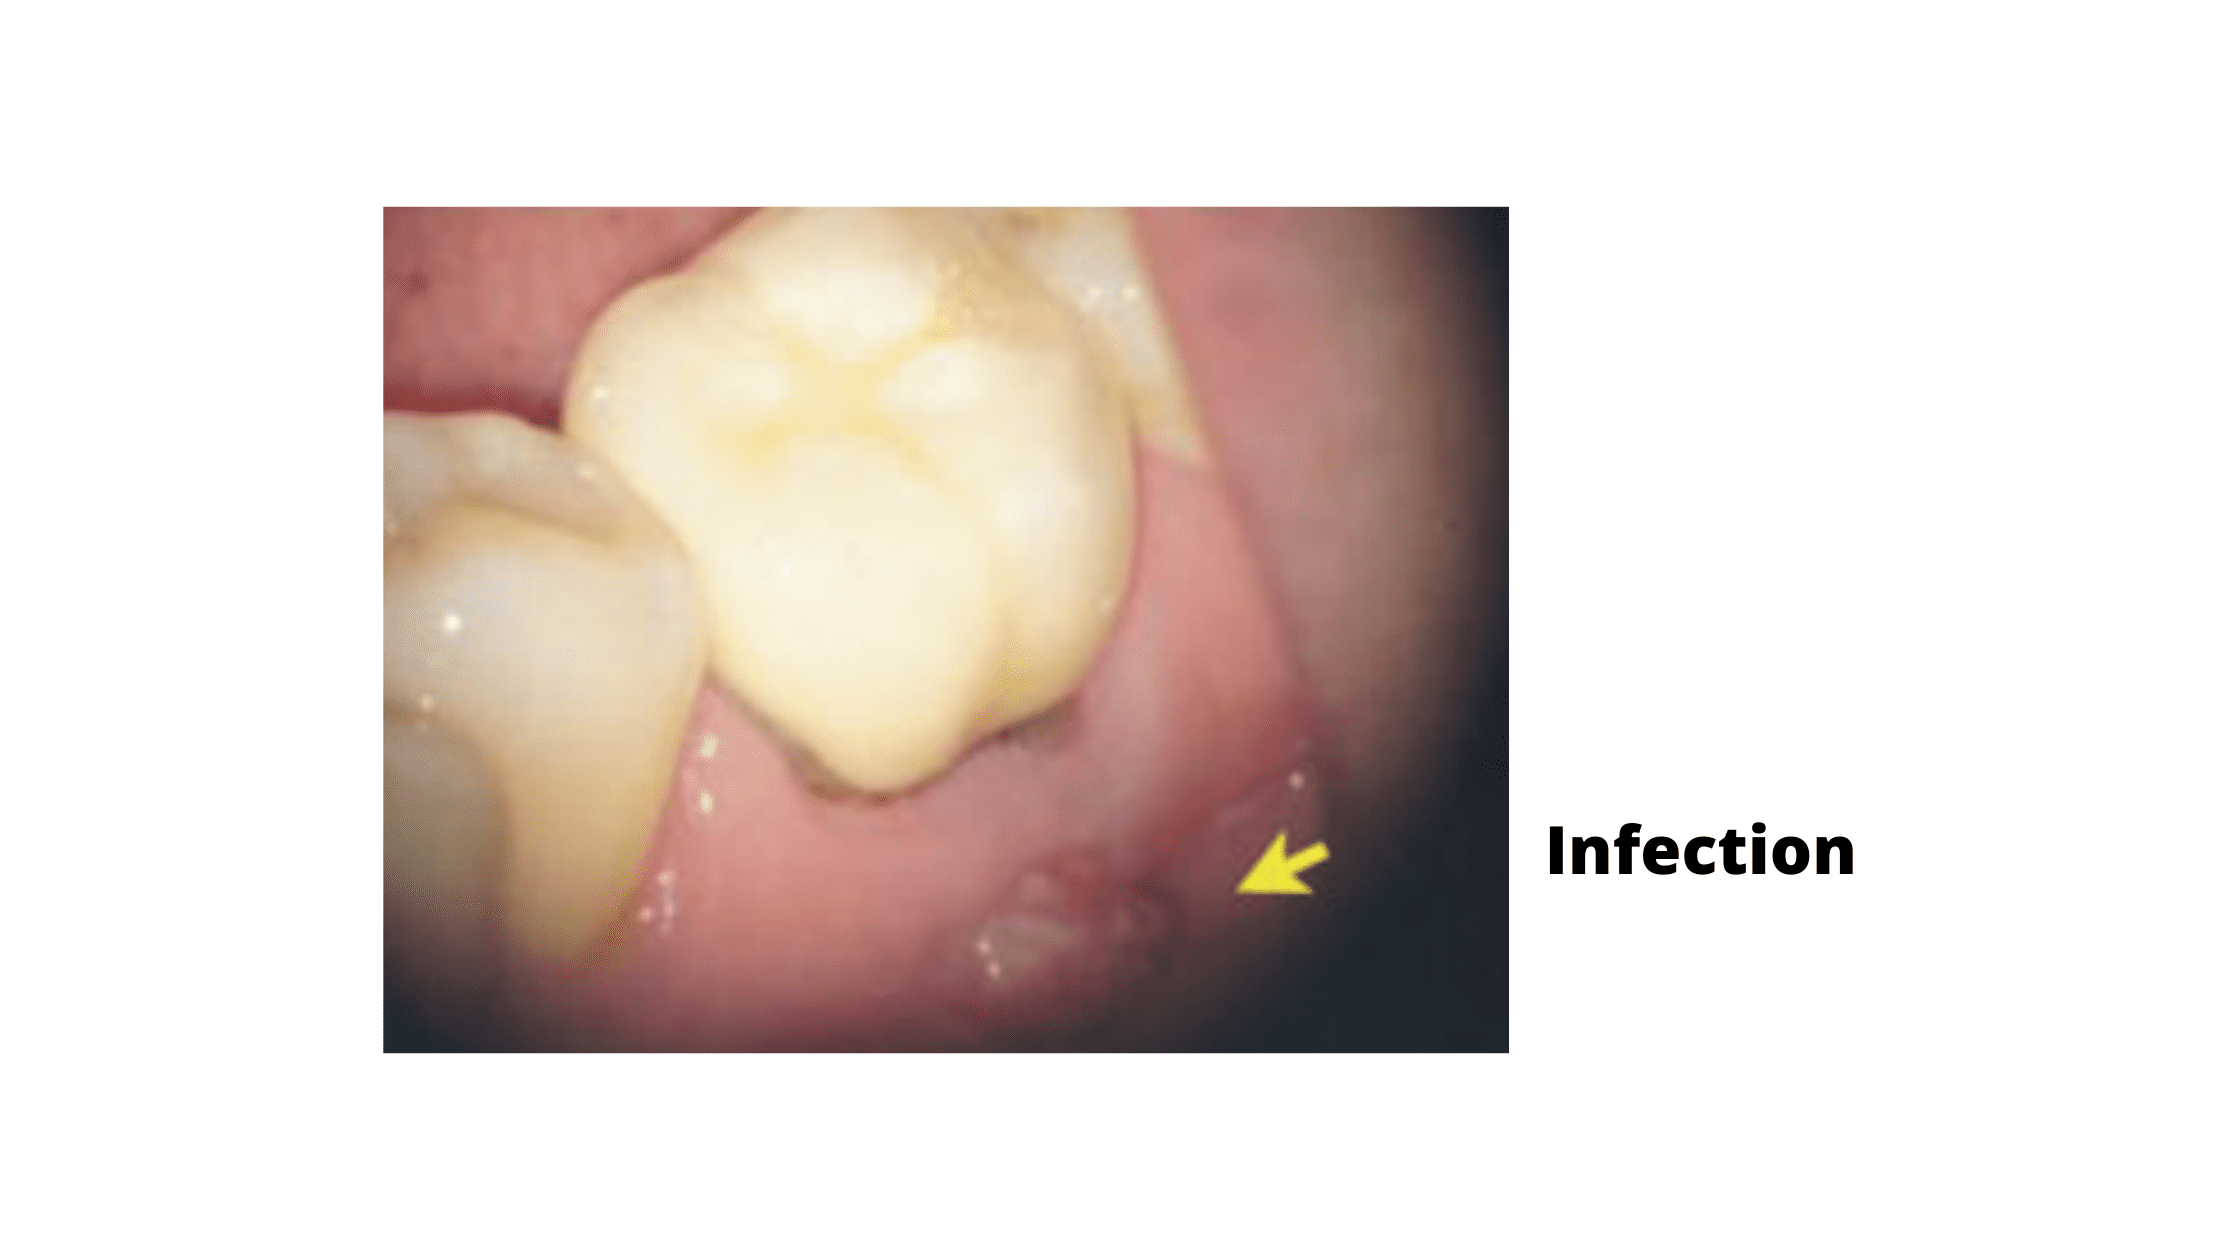 Infection of a crowned tooth